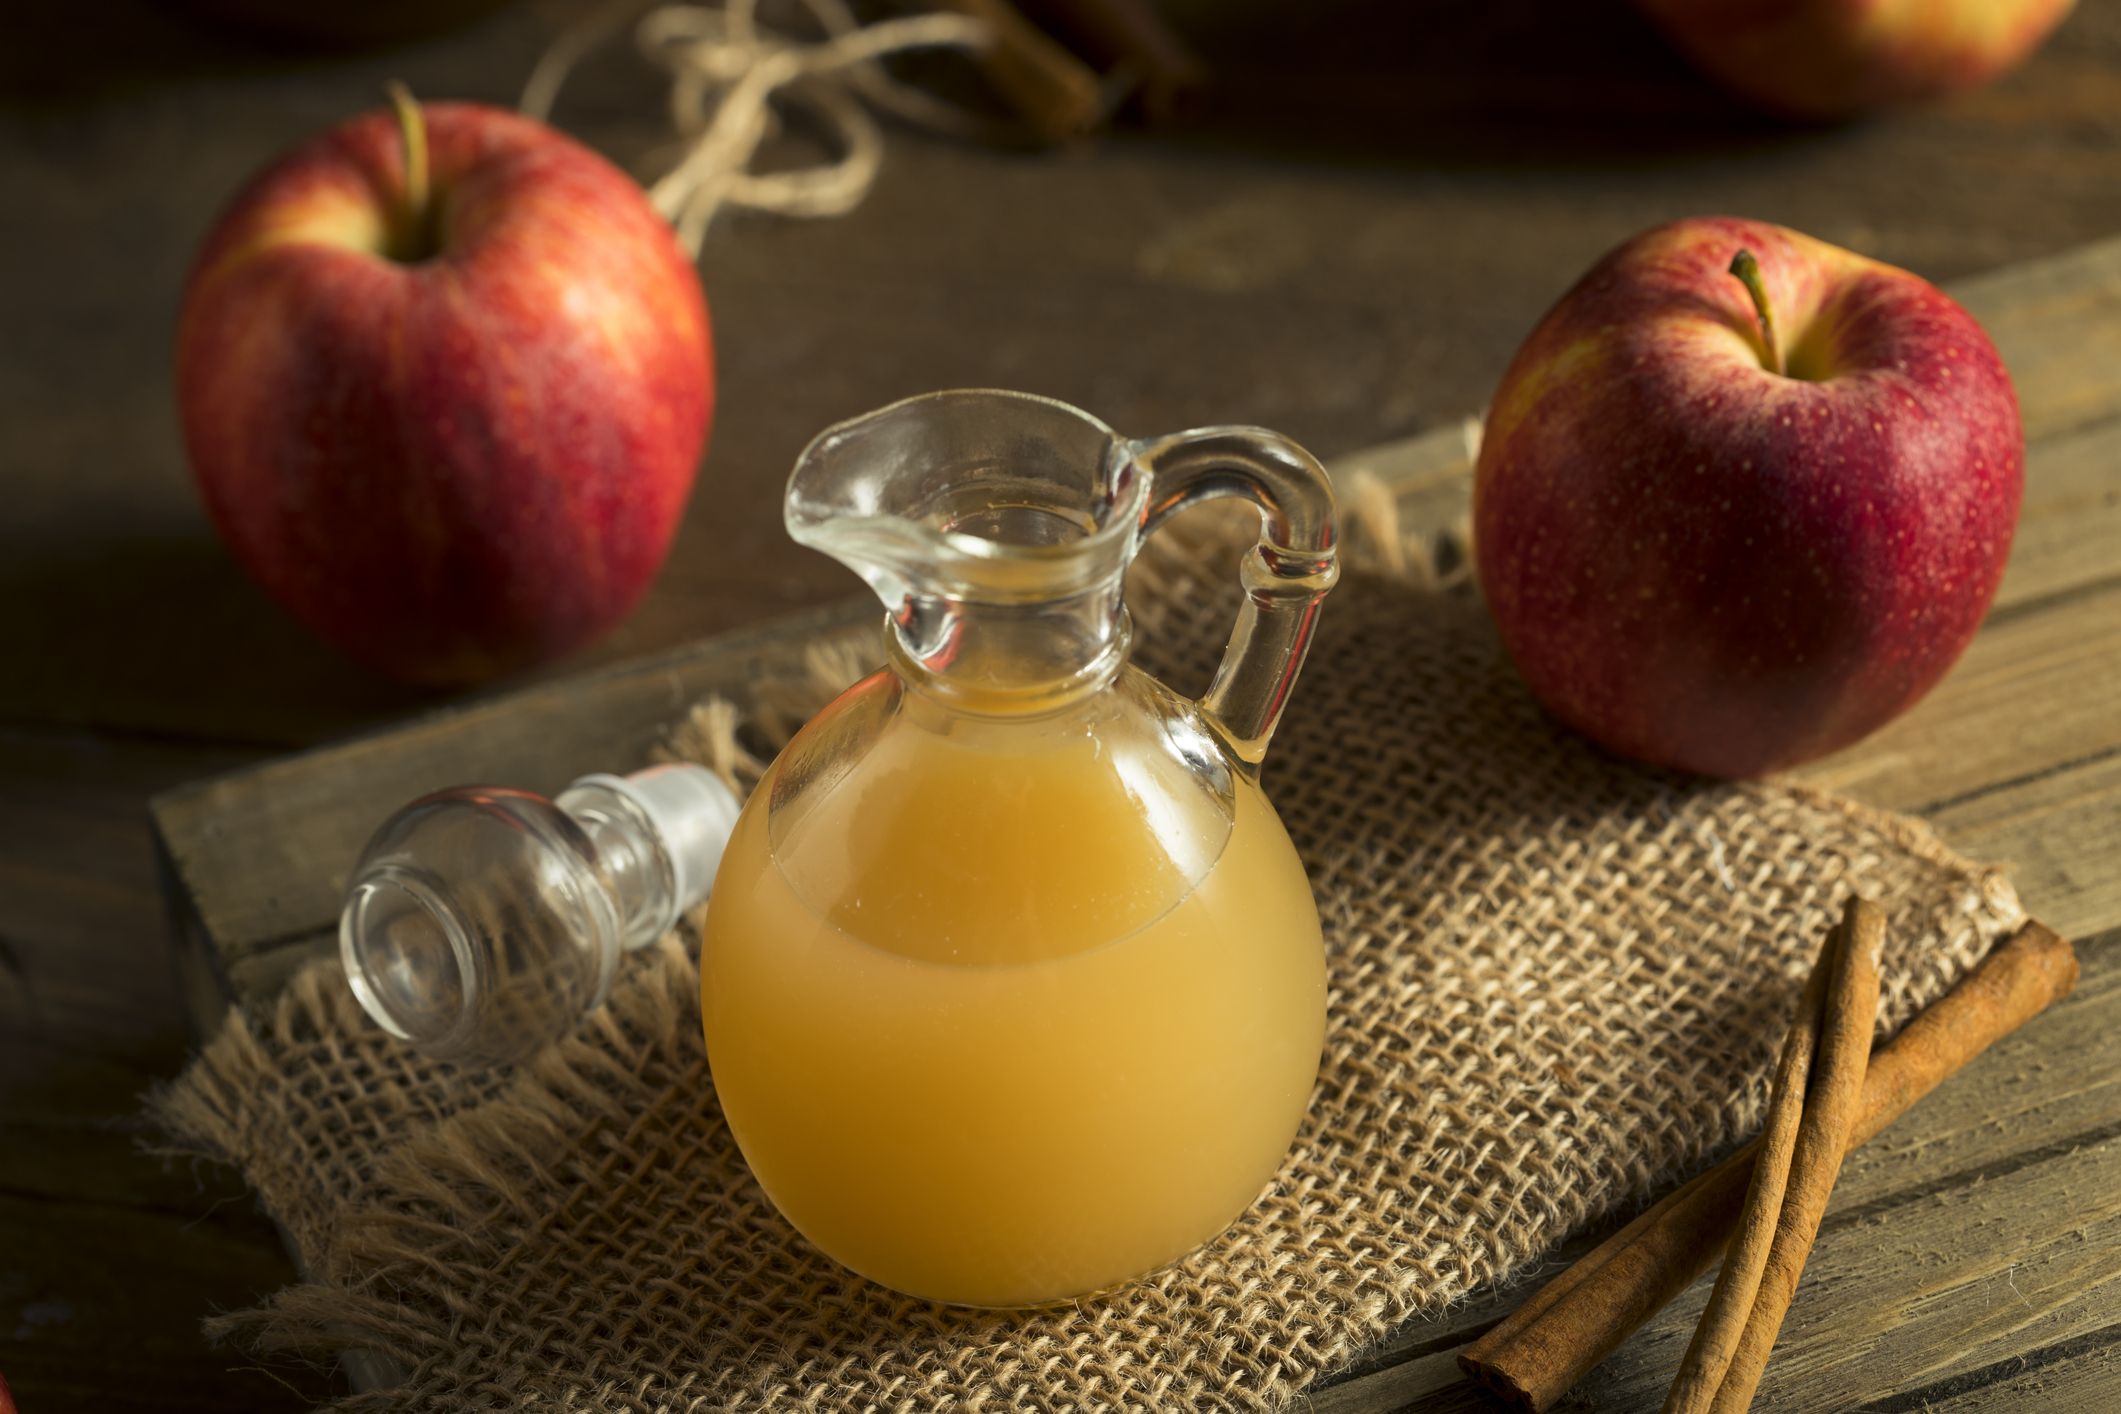 Here are 20 incredible uses for apple cider vinegar pic